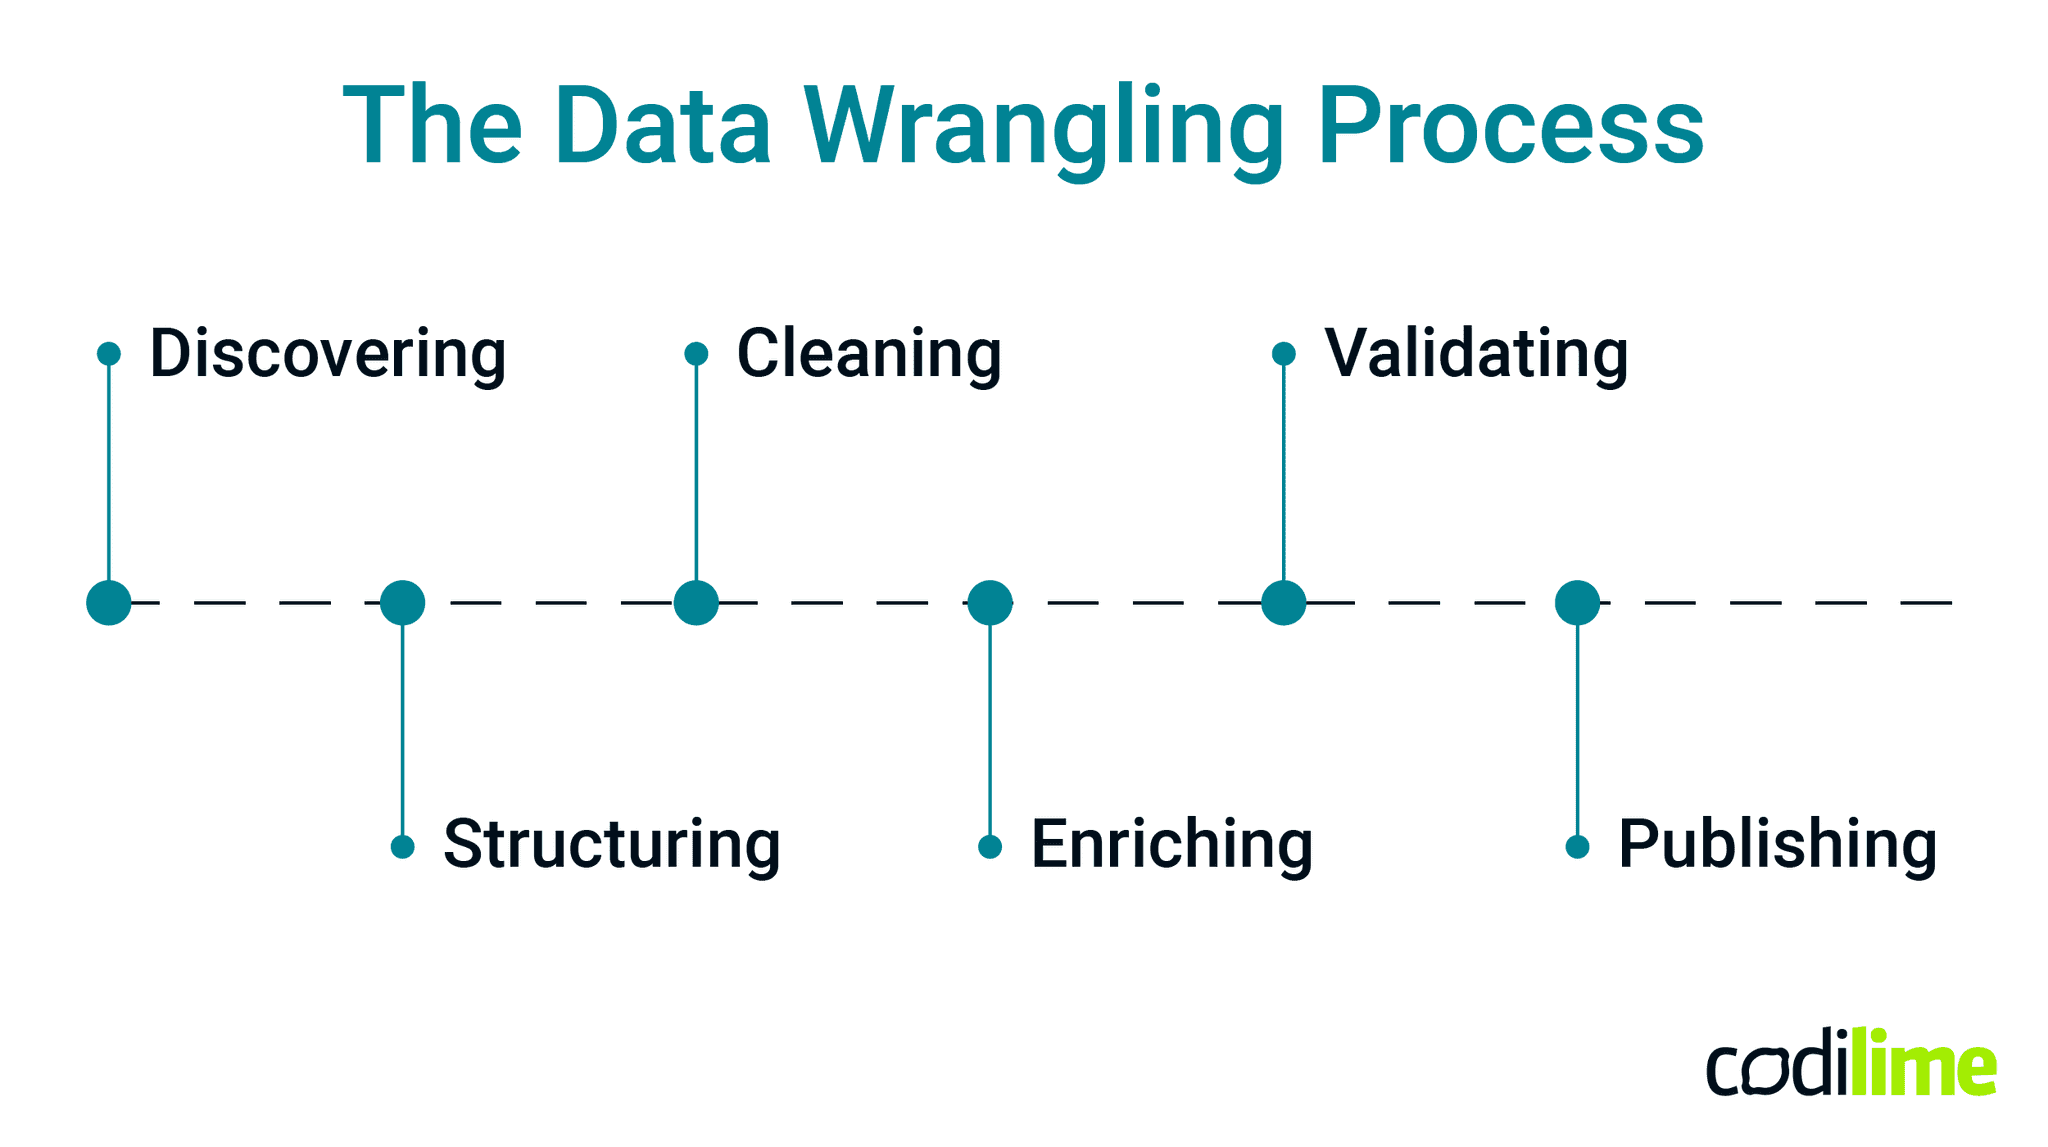 The data wrangling process